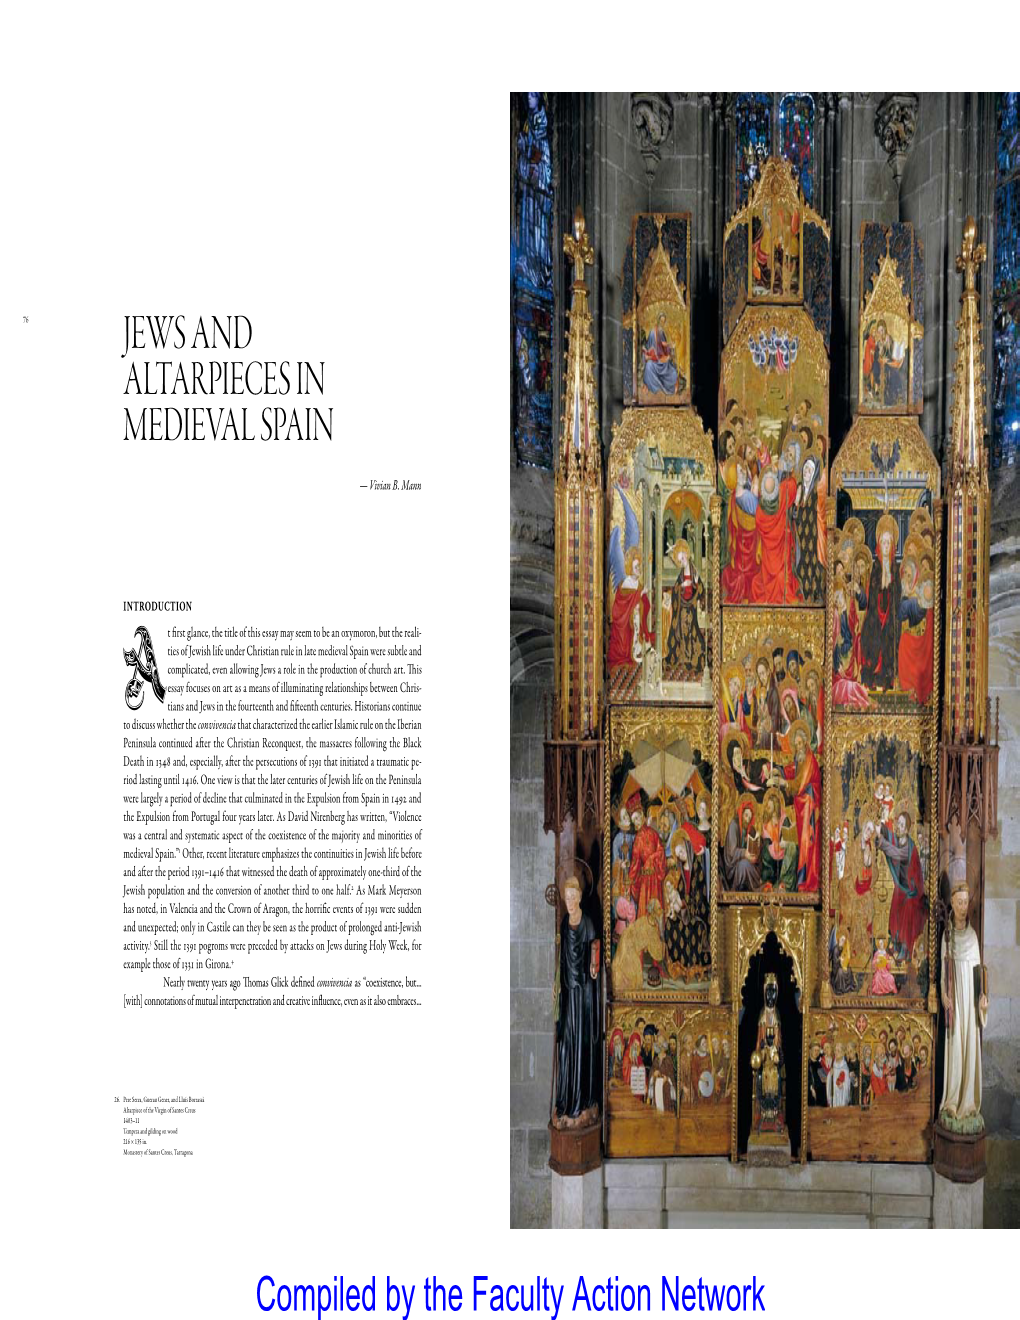 Jews and Altarpieces in Medieval Spain